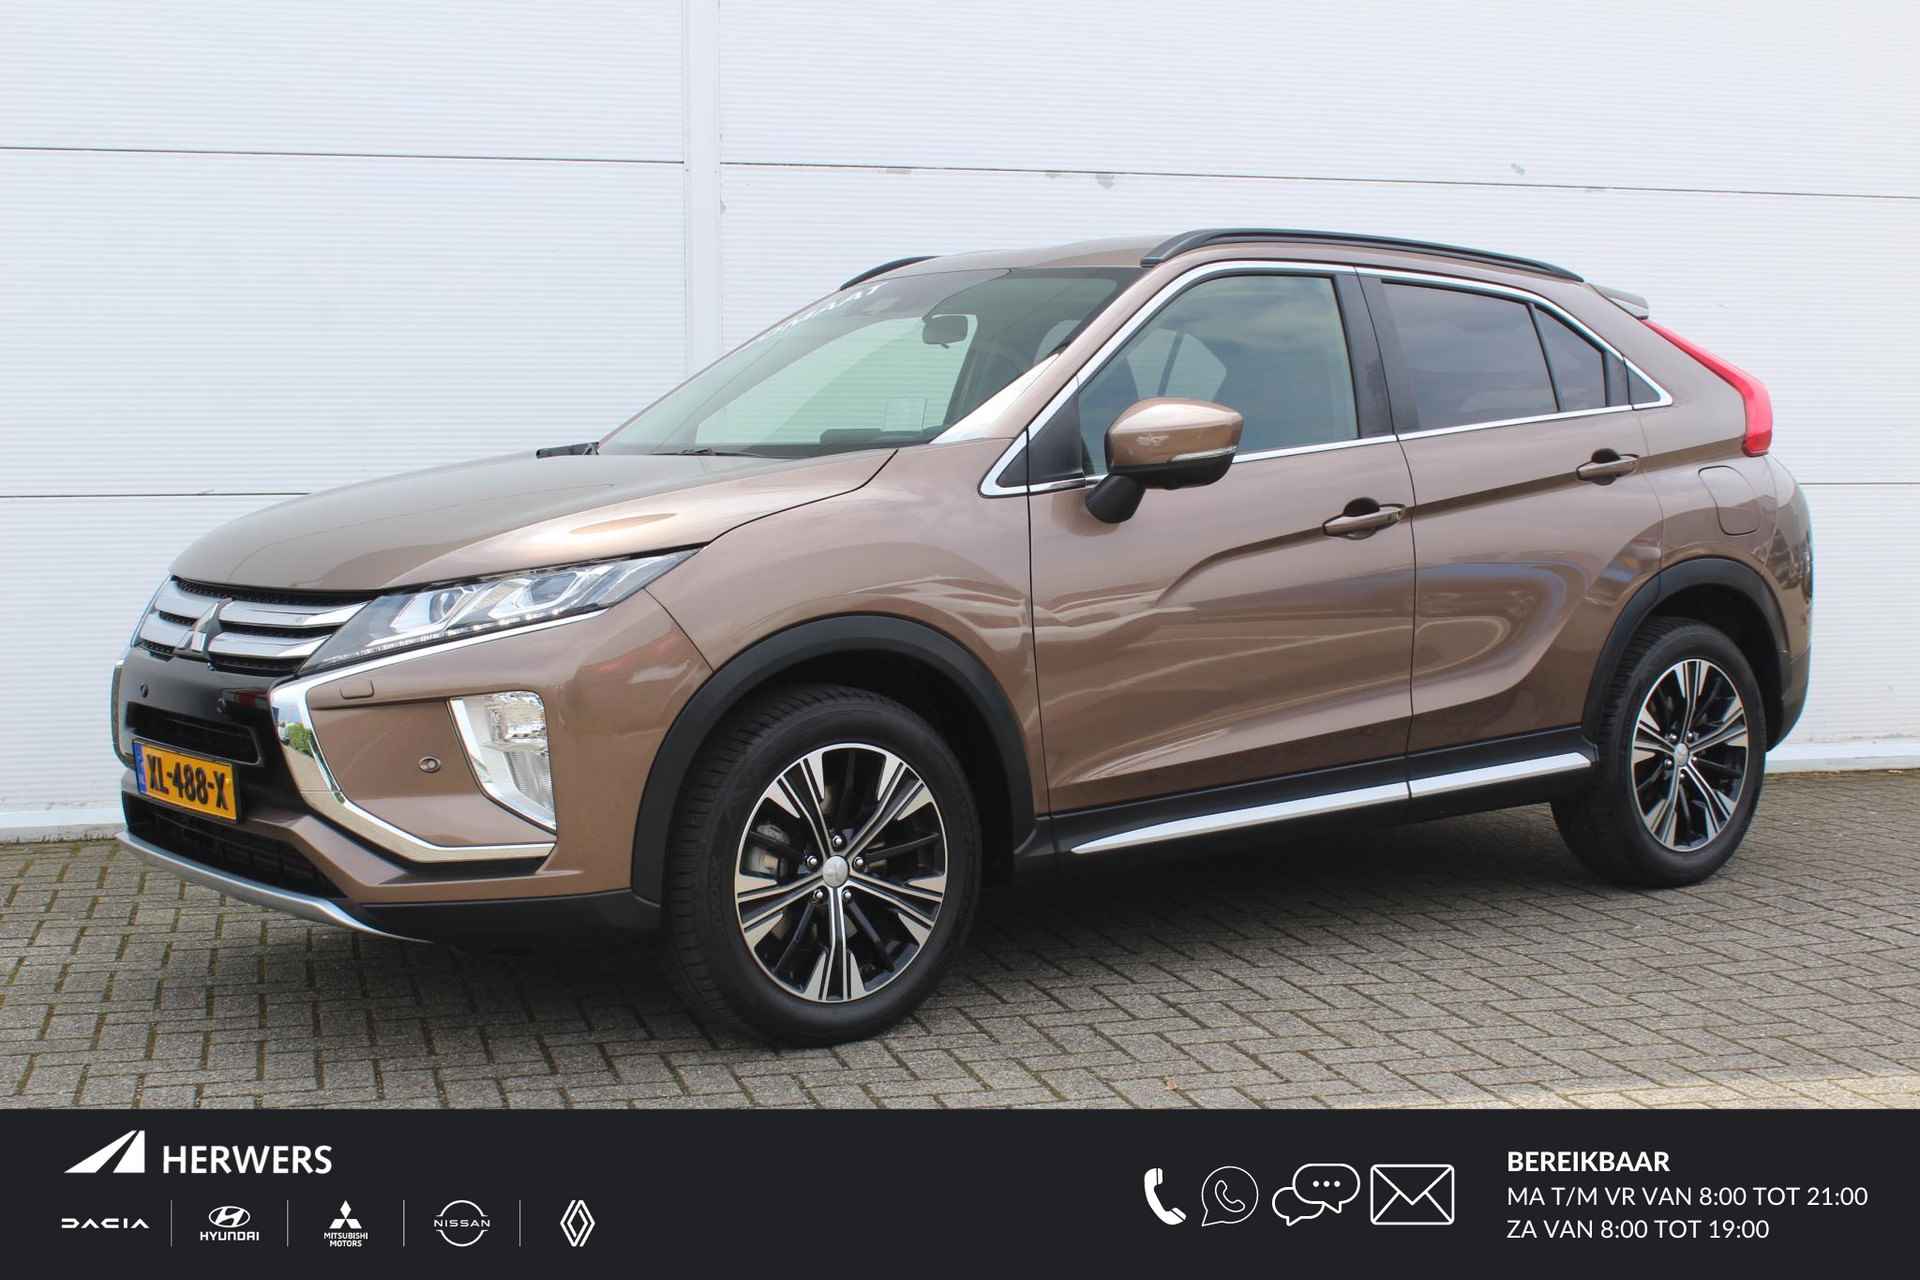 Mitsubishi Eclipse Cross 1.5 DI-T First Edition AUTOMAAT / Trekhaak (1600 KG) / Apple Carplay/Android Auto / 360* Camera / Cruise Control / Stoelverwarming Voor / - 1/47